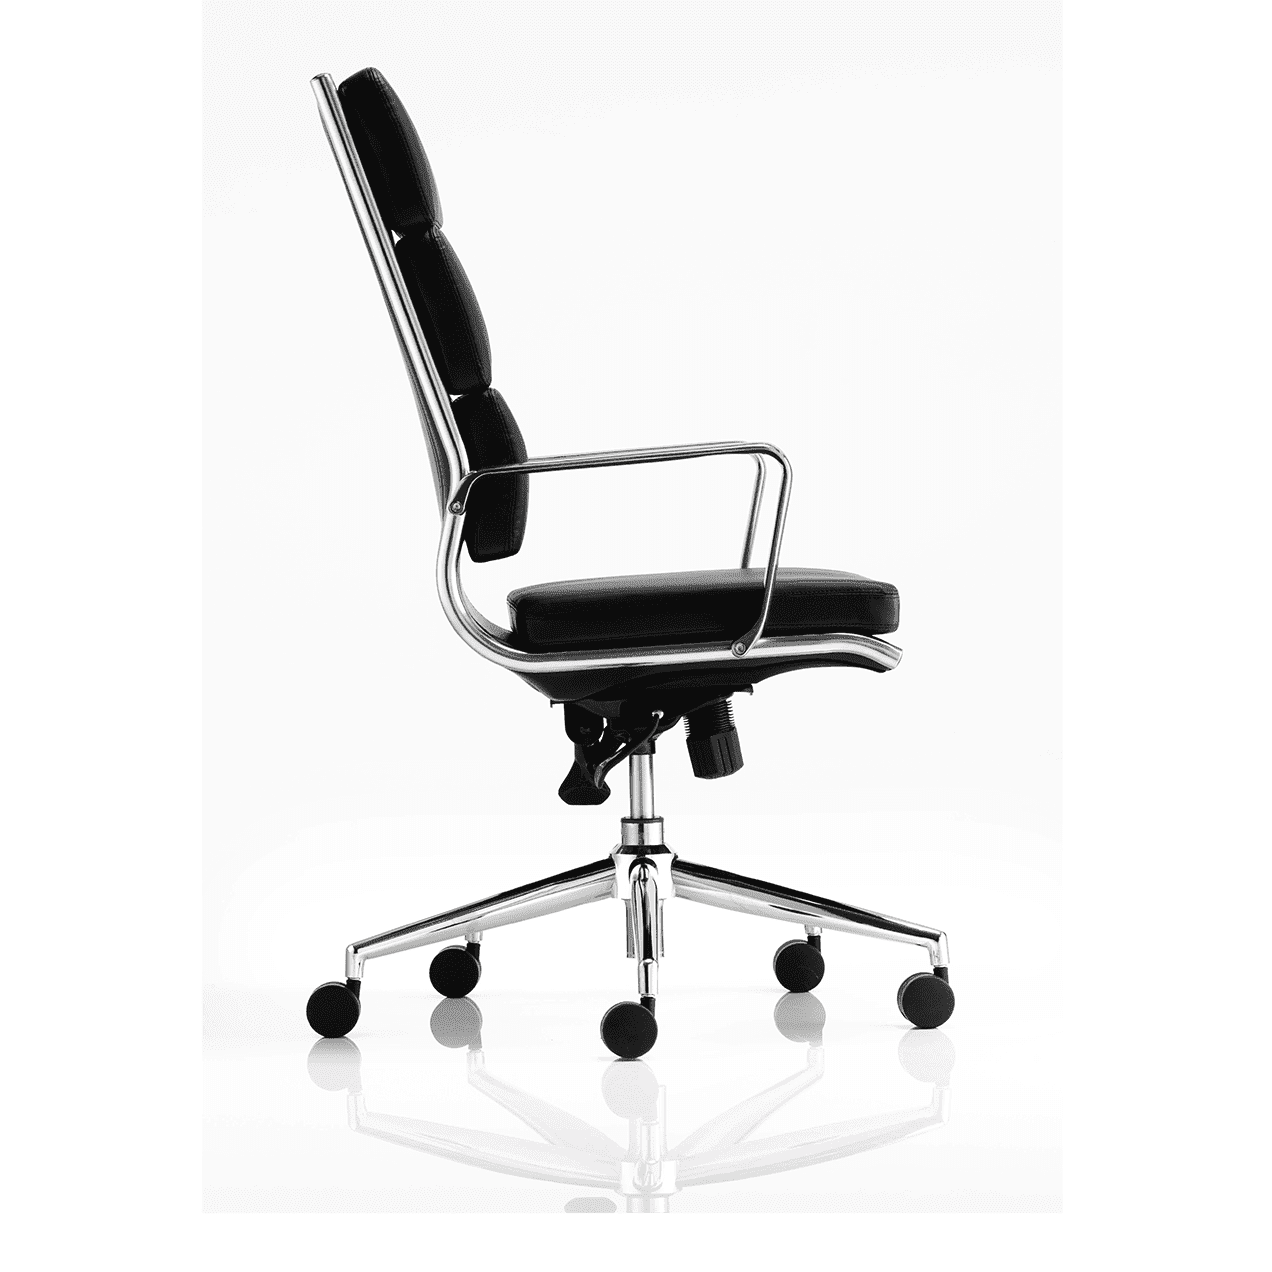 Savoy High Back Executive Office Chair - Black Leather, Chrome Frame, Fixed Arms, 110kg Capacity, 8hr Usage, Gas Height & Tilt Adjustment